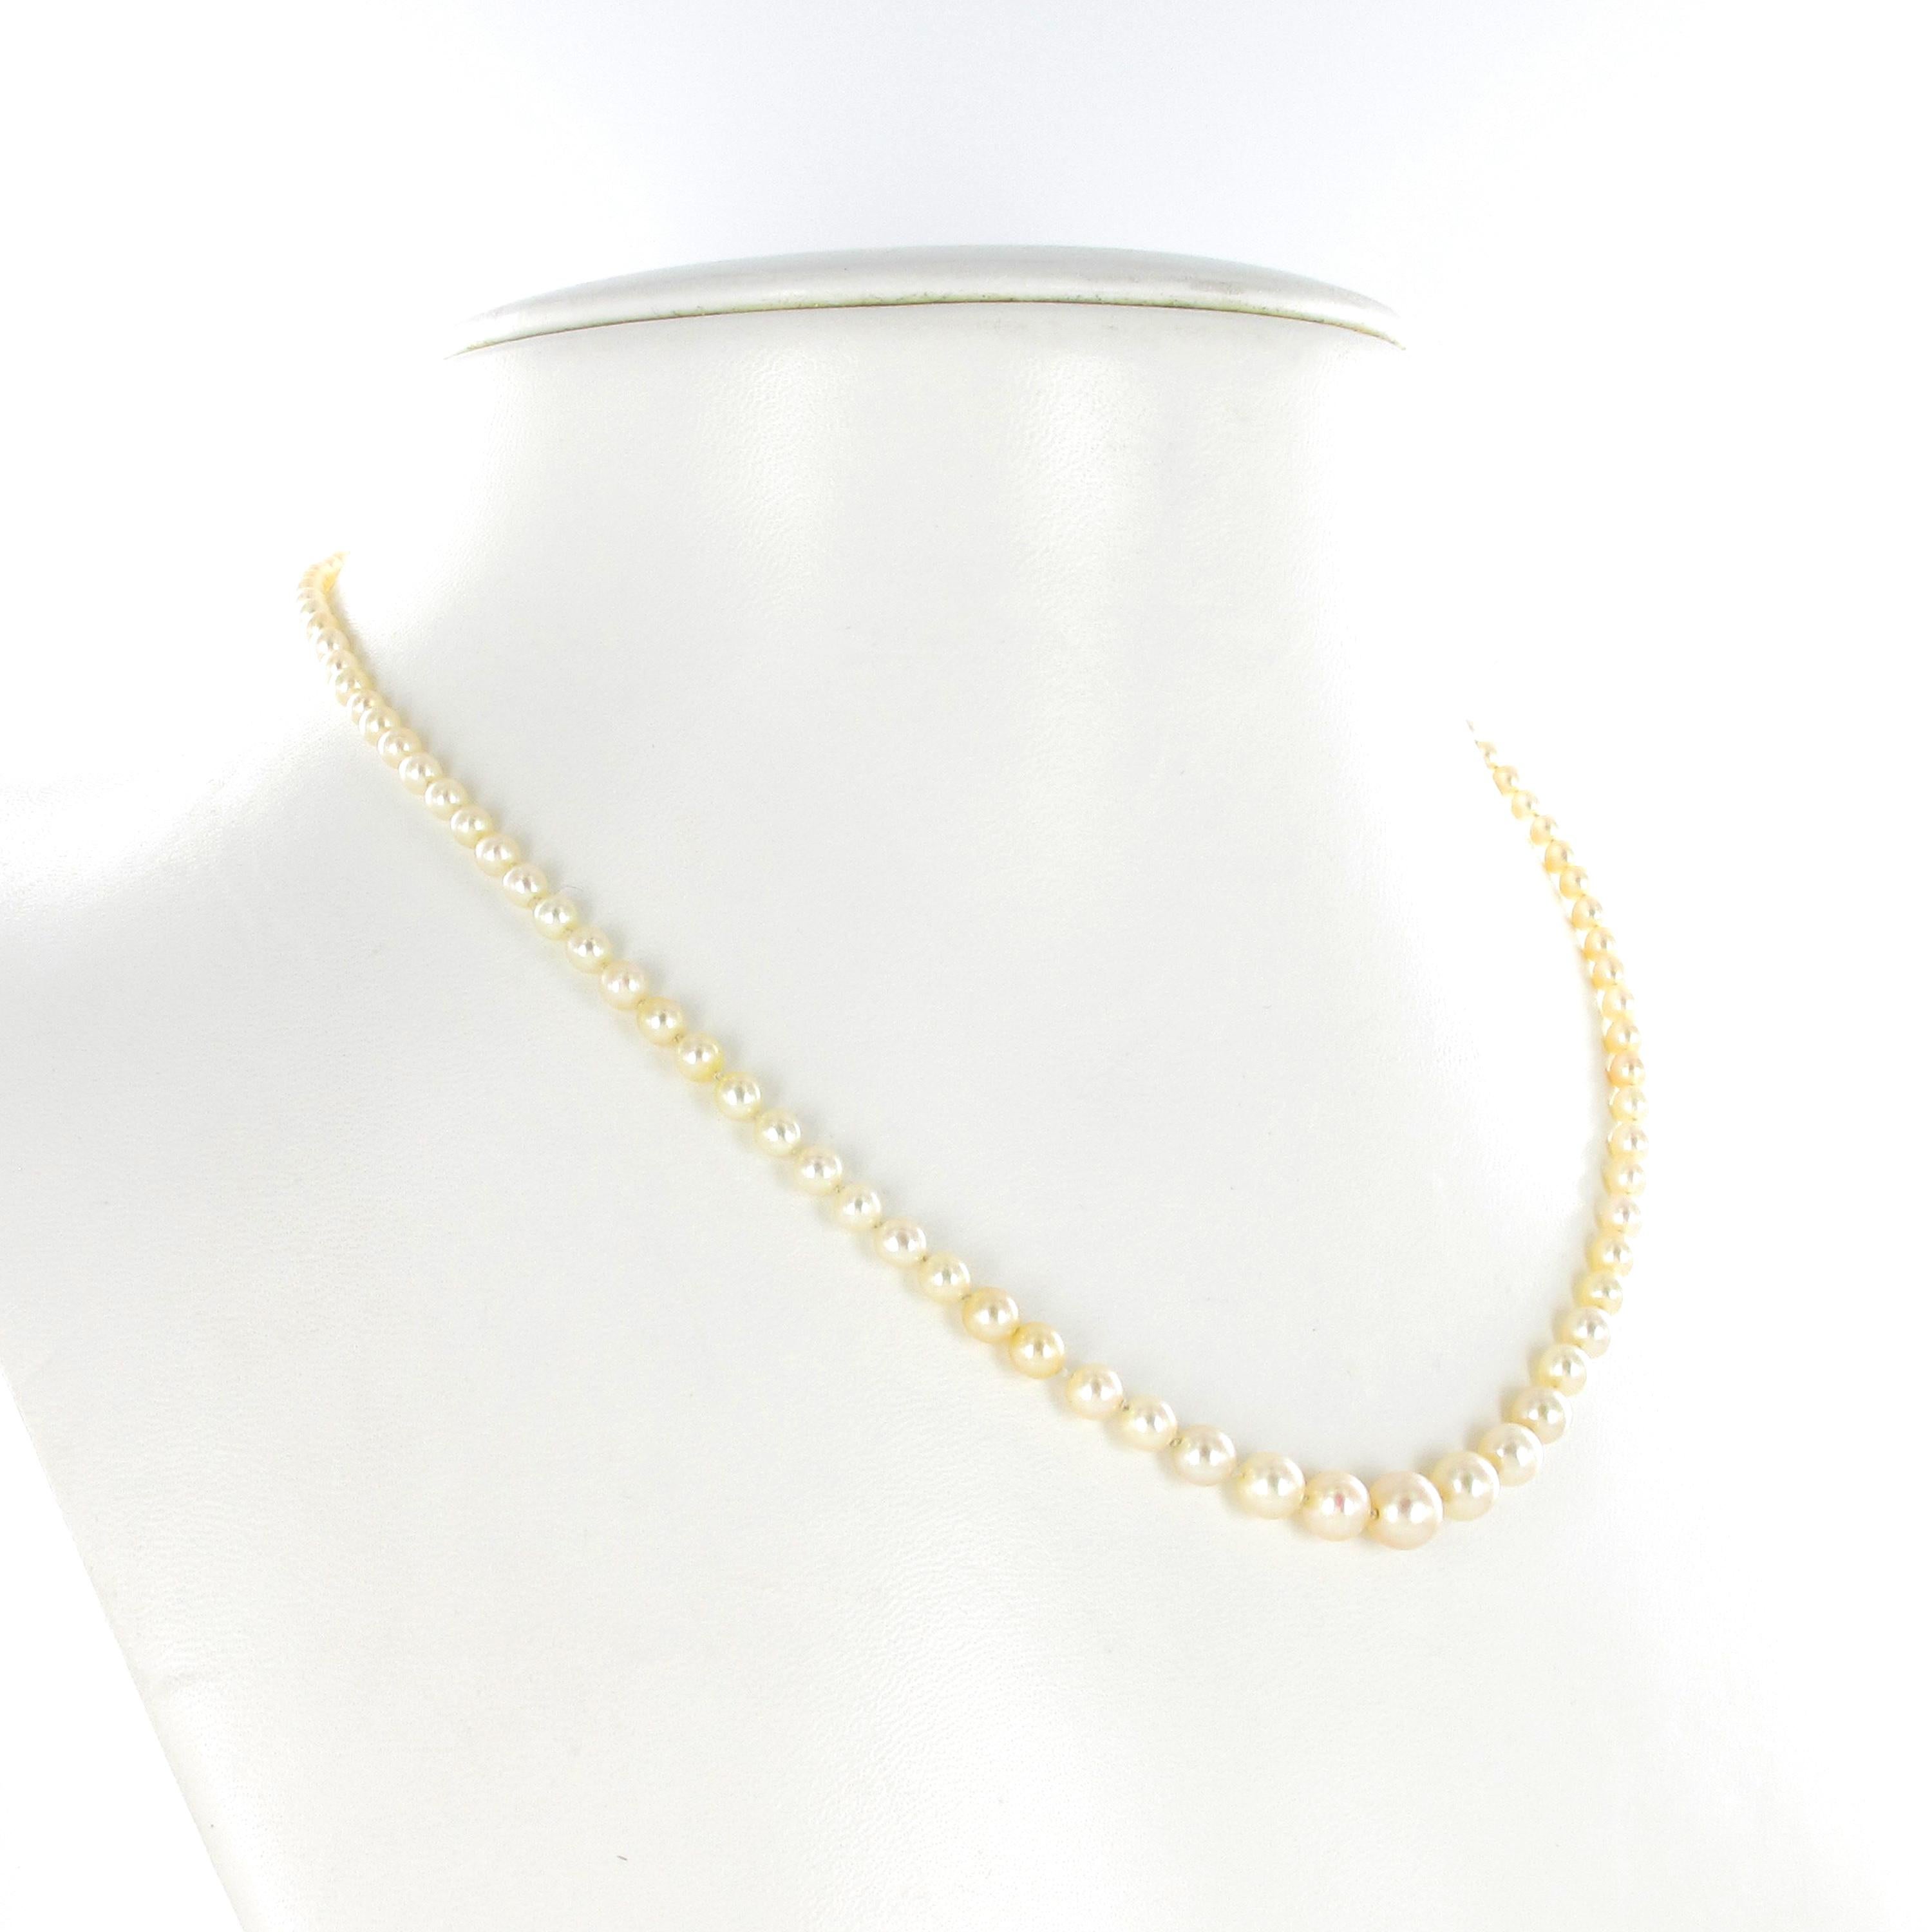 Super cute single strand saltwater natural pearl necklace. 99 fine natural pearls ranging from 2.85 to 6.40 mm in size with a very fine luster and clean surface. A true gem solely created by Mother Nature. This item is exclusively reserved for pearl